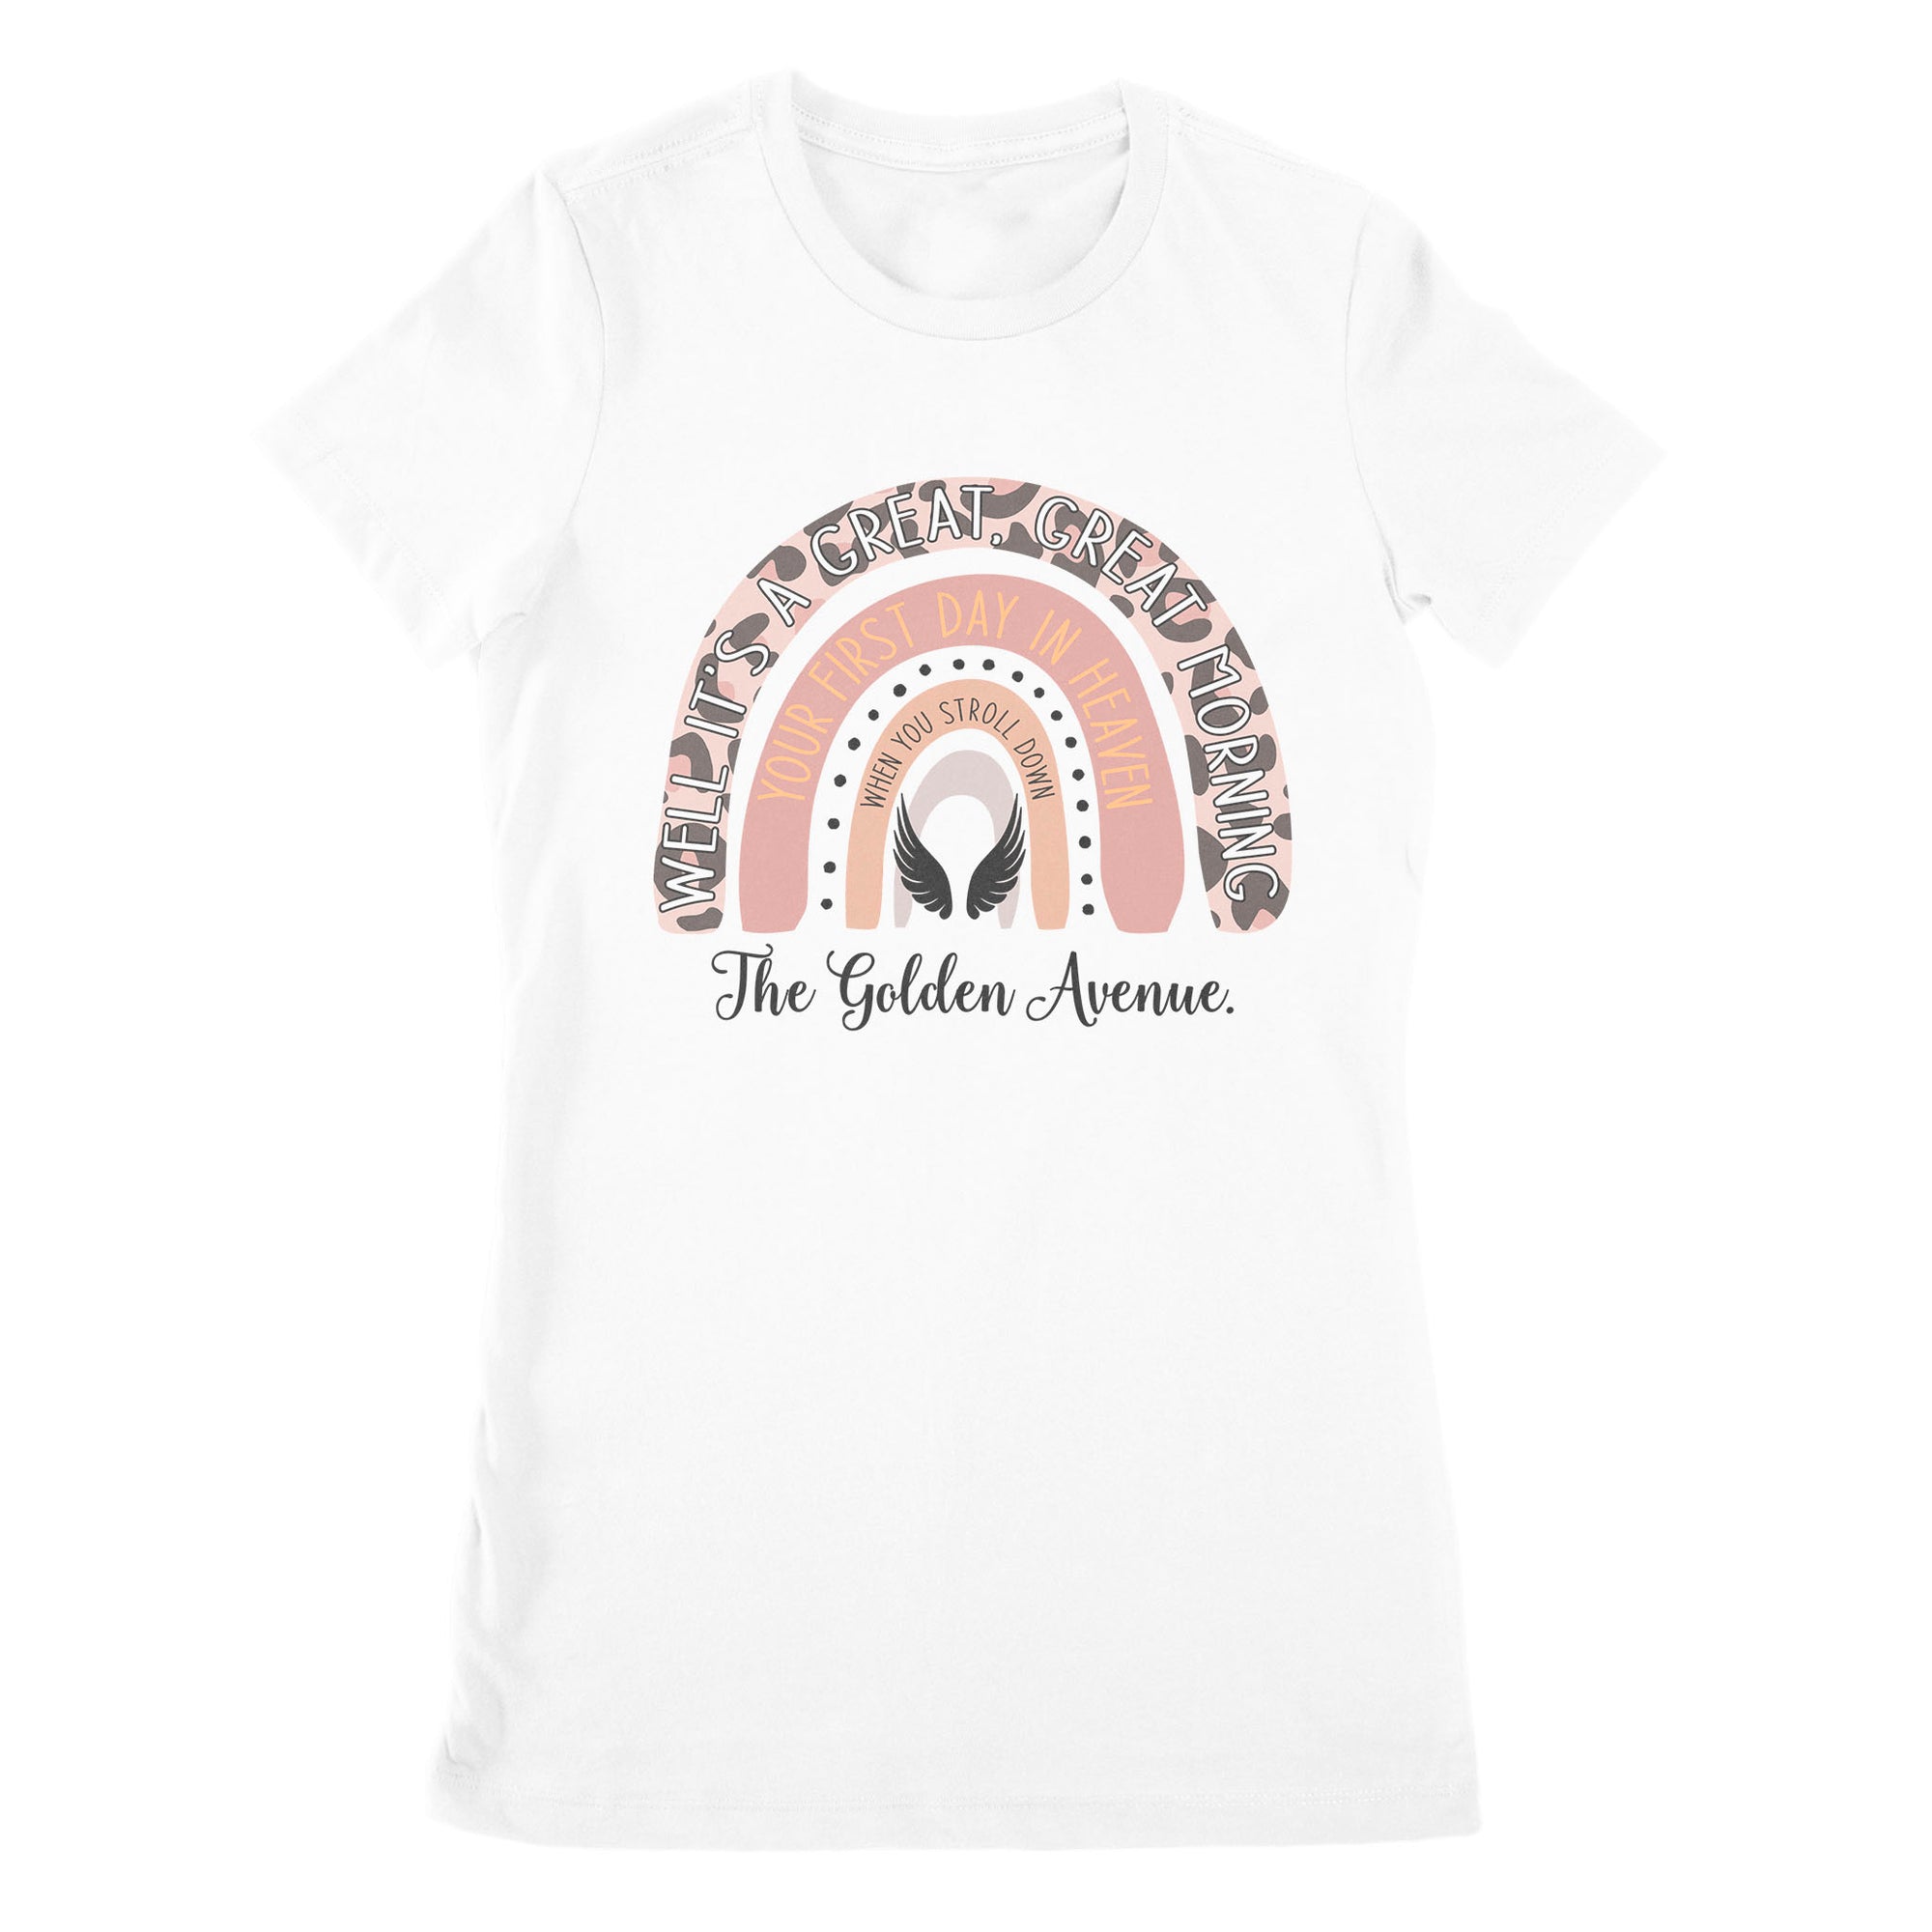 Premium Women's T-shirt - Your First Day In Heaven